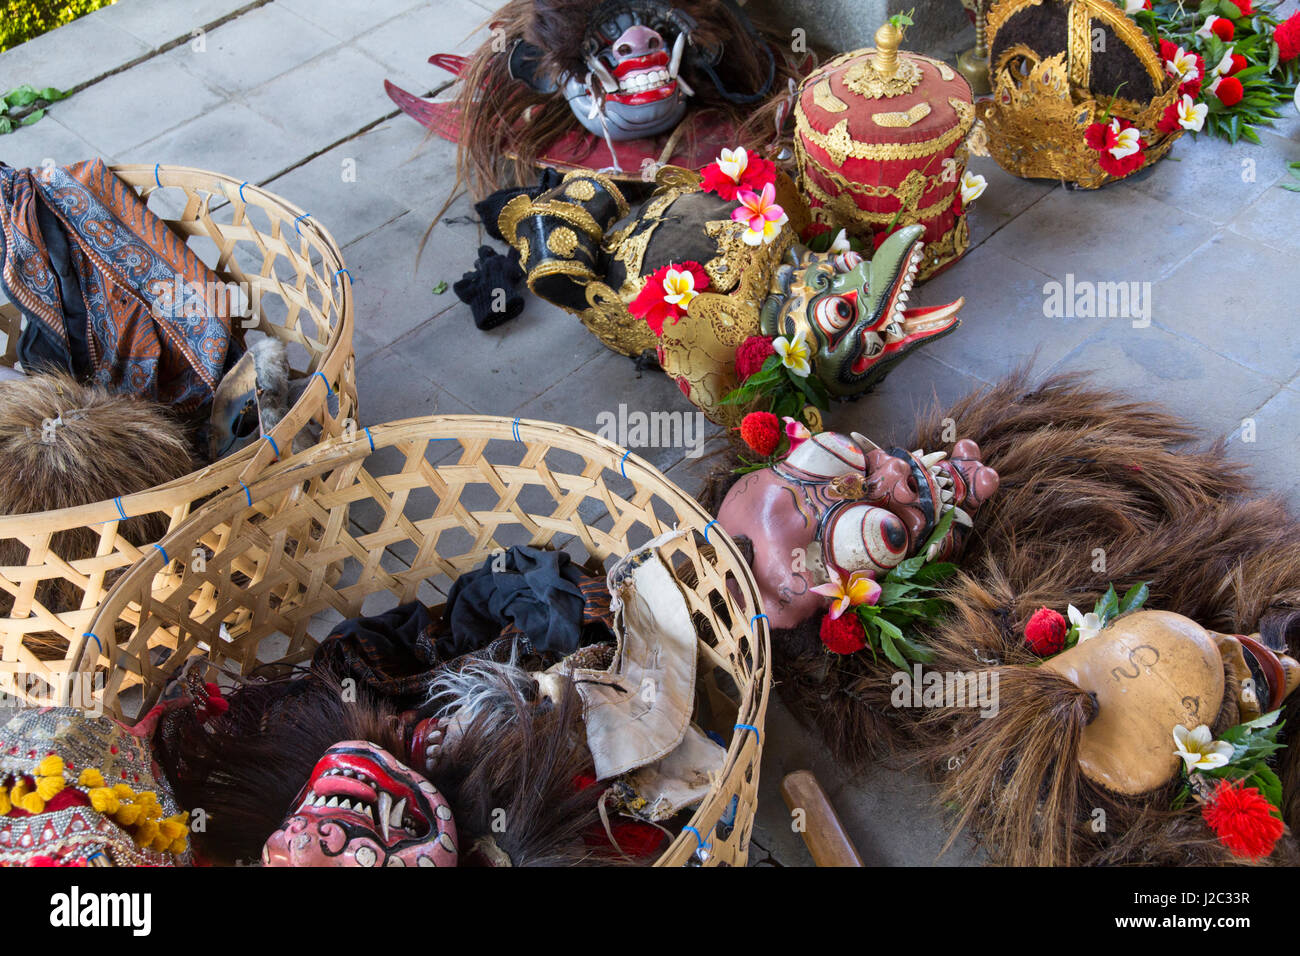 Indonesia, Bali. Balinese Barong masks and ceremonial head dresses decorated with red Hibiscus and Frangipani flowers in Bali, Indonesia. Stock Photo